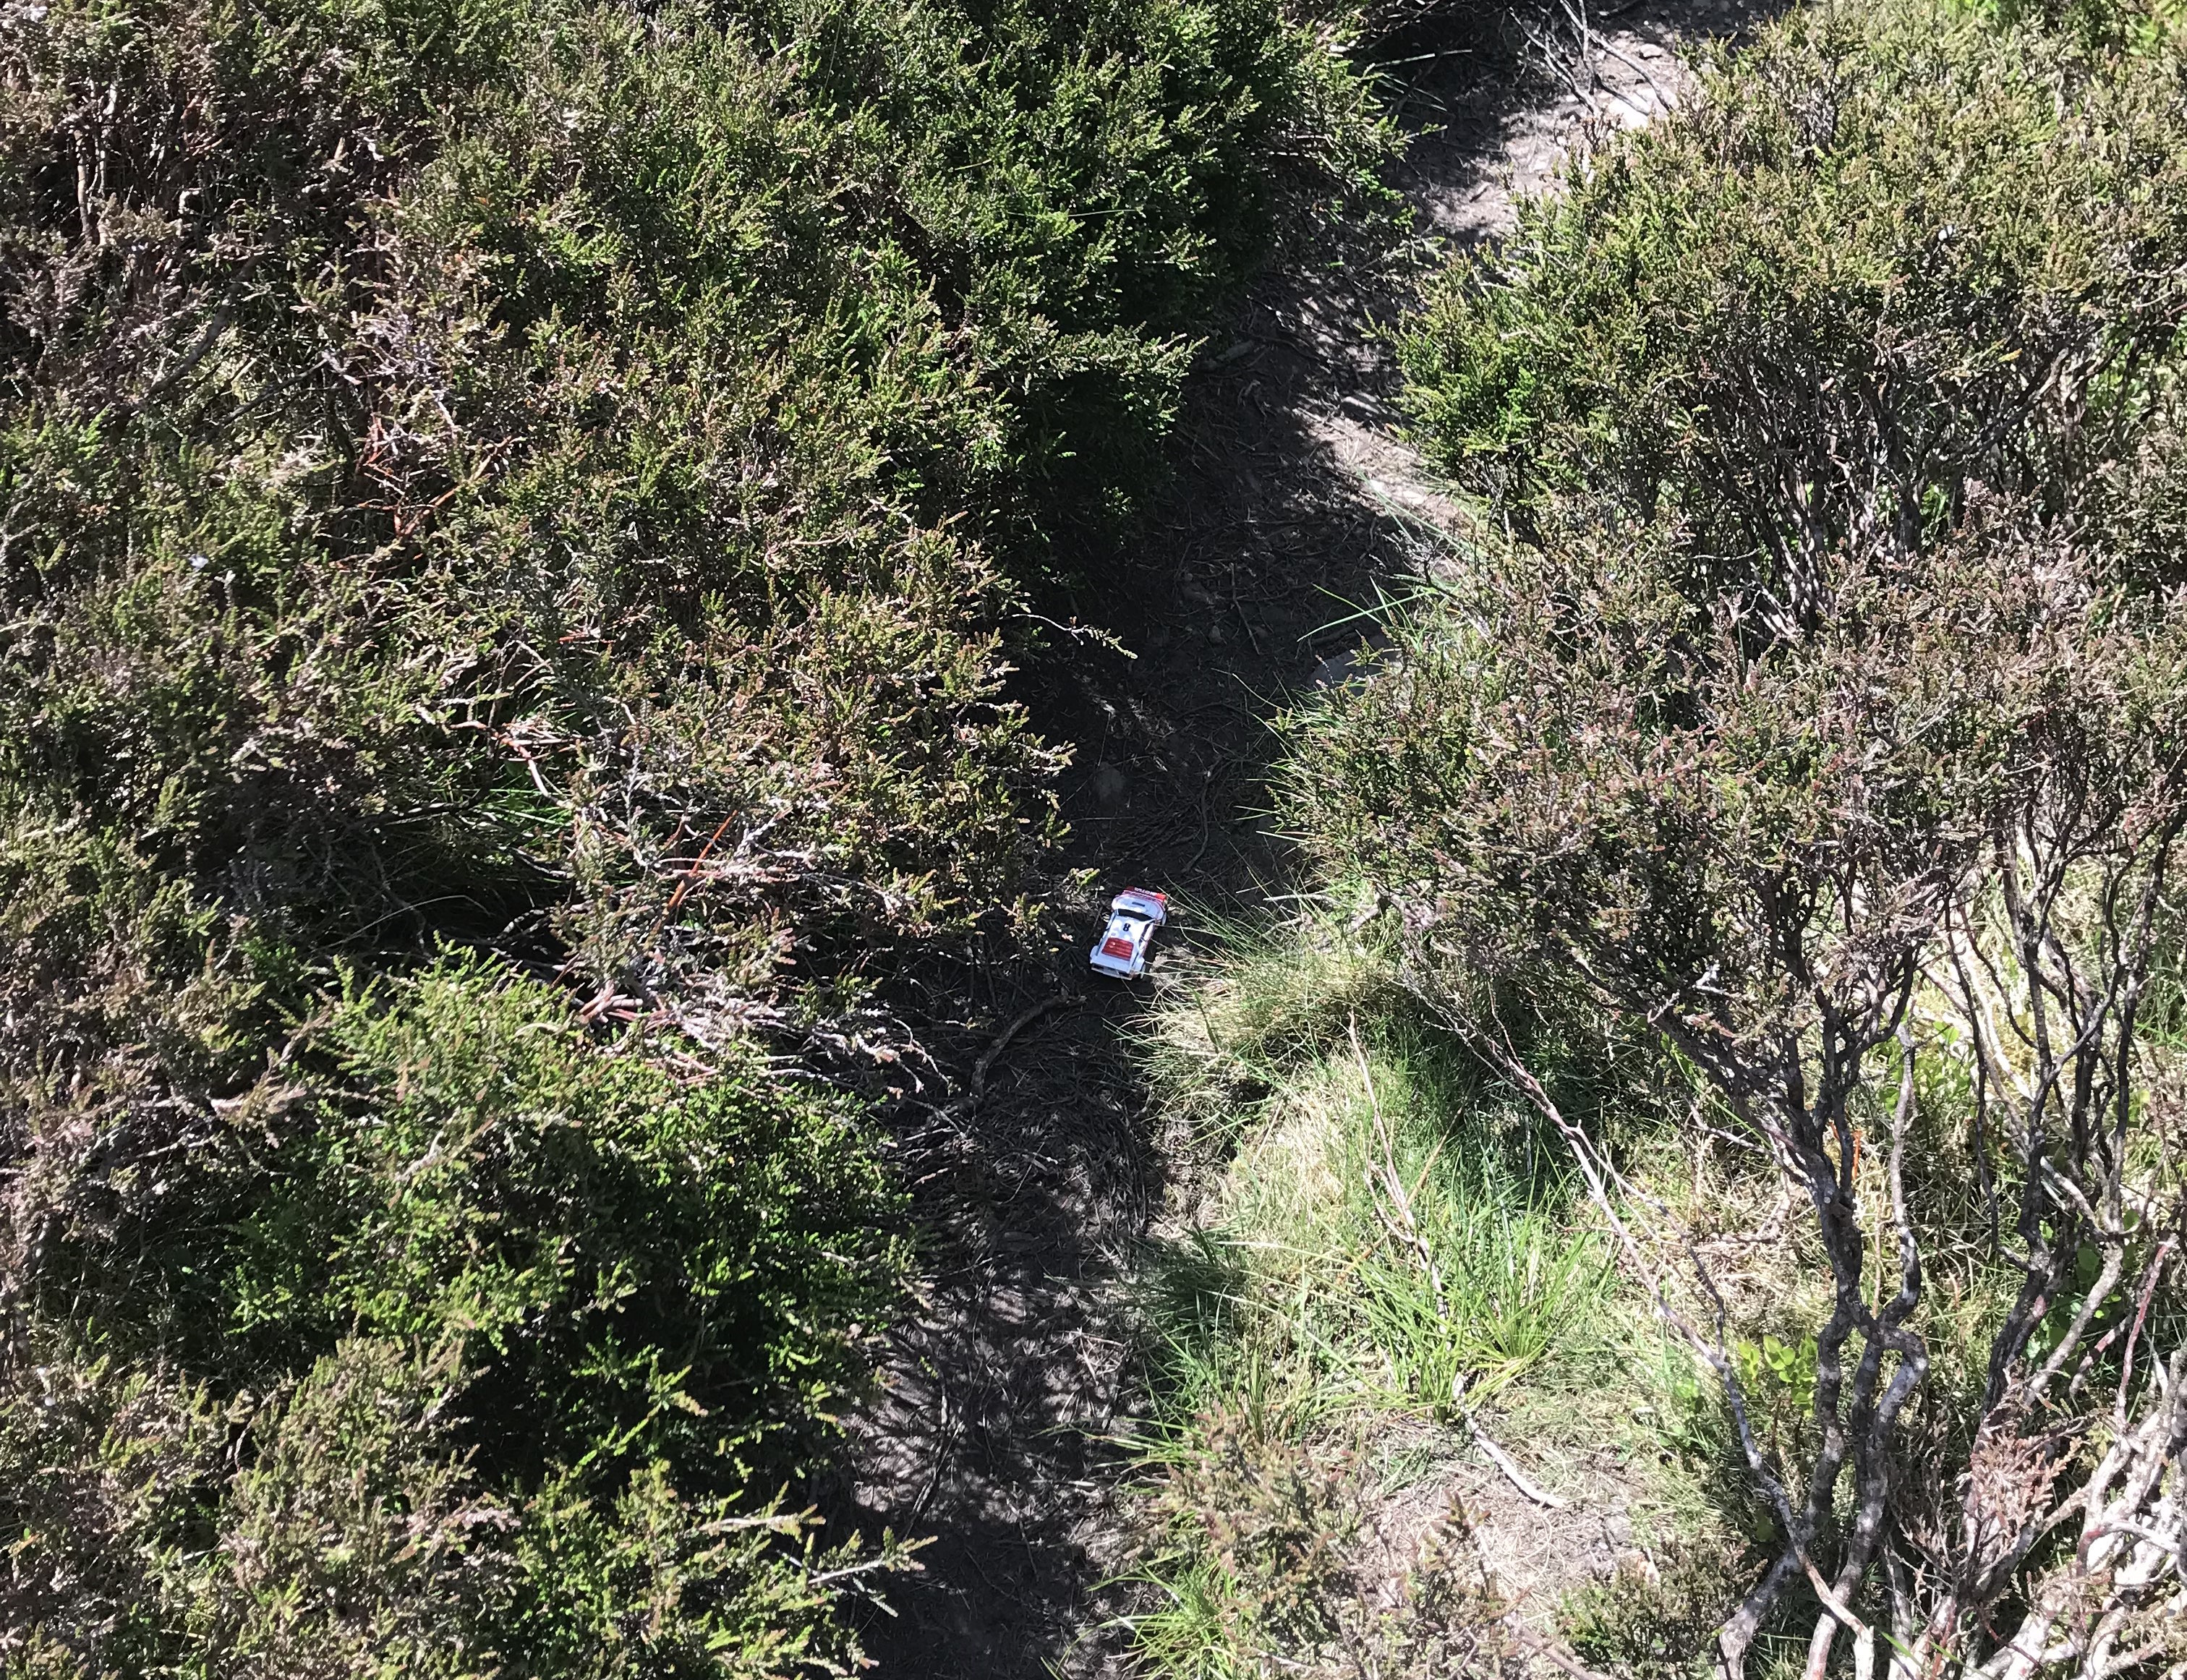 Hotwheels Grp B Rally BMW M1 on a path surrounded by heather. The photo is taken from above, making the heather almost look like trees [The Most Mysterious Song on the Internet]